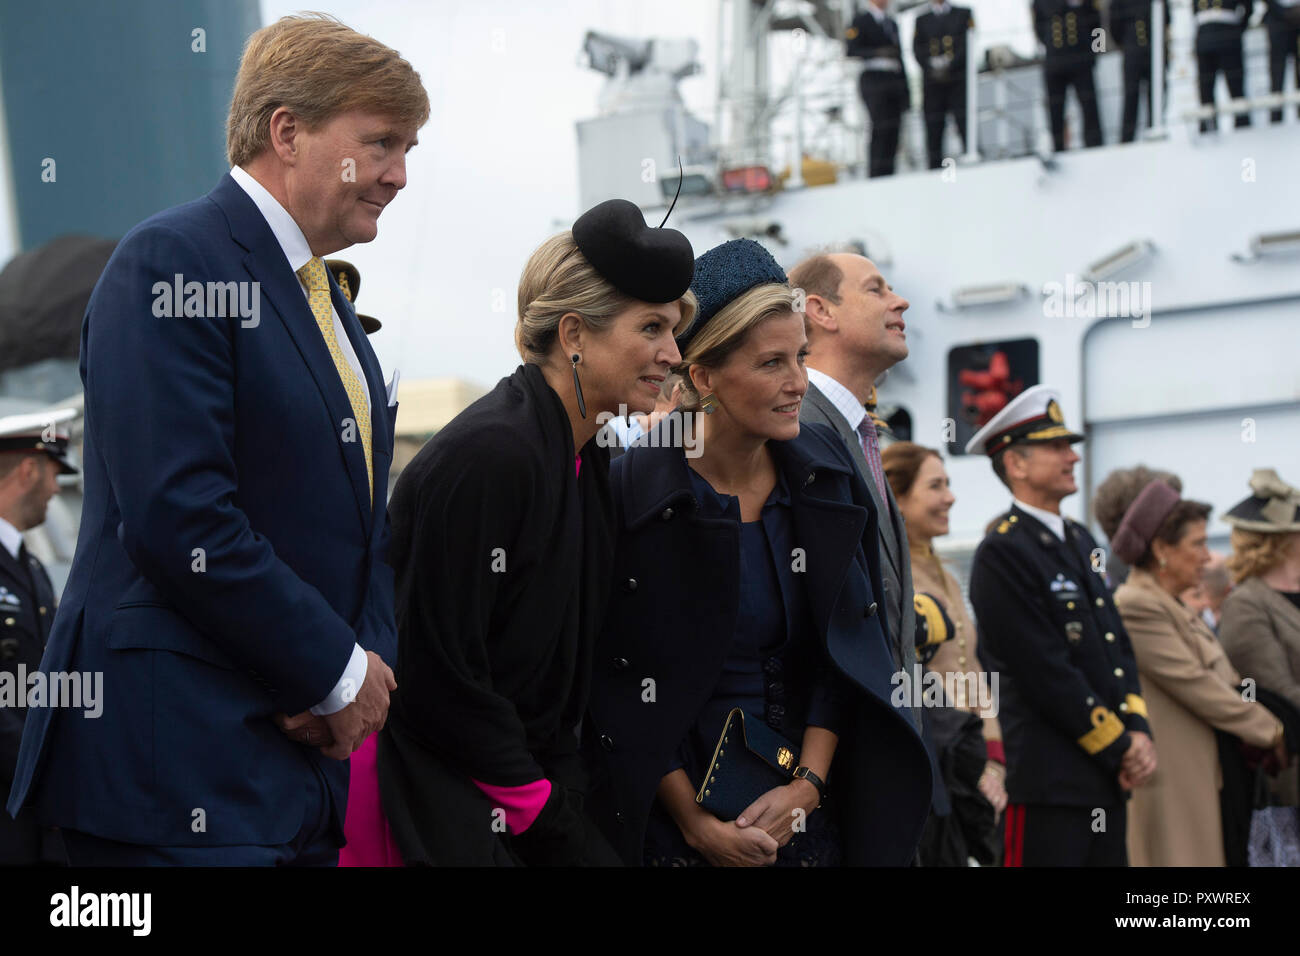 (Left to right) King Willem-Alexander and Queen Maxima of the Netherlands with the Countess and Earl of Wessex on HMS Belfast in London to watch an on-the-water capability demonstration between the Royal Netherlands Marine Corps and the Royal Marines. Stock Photo